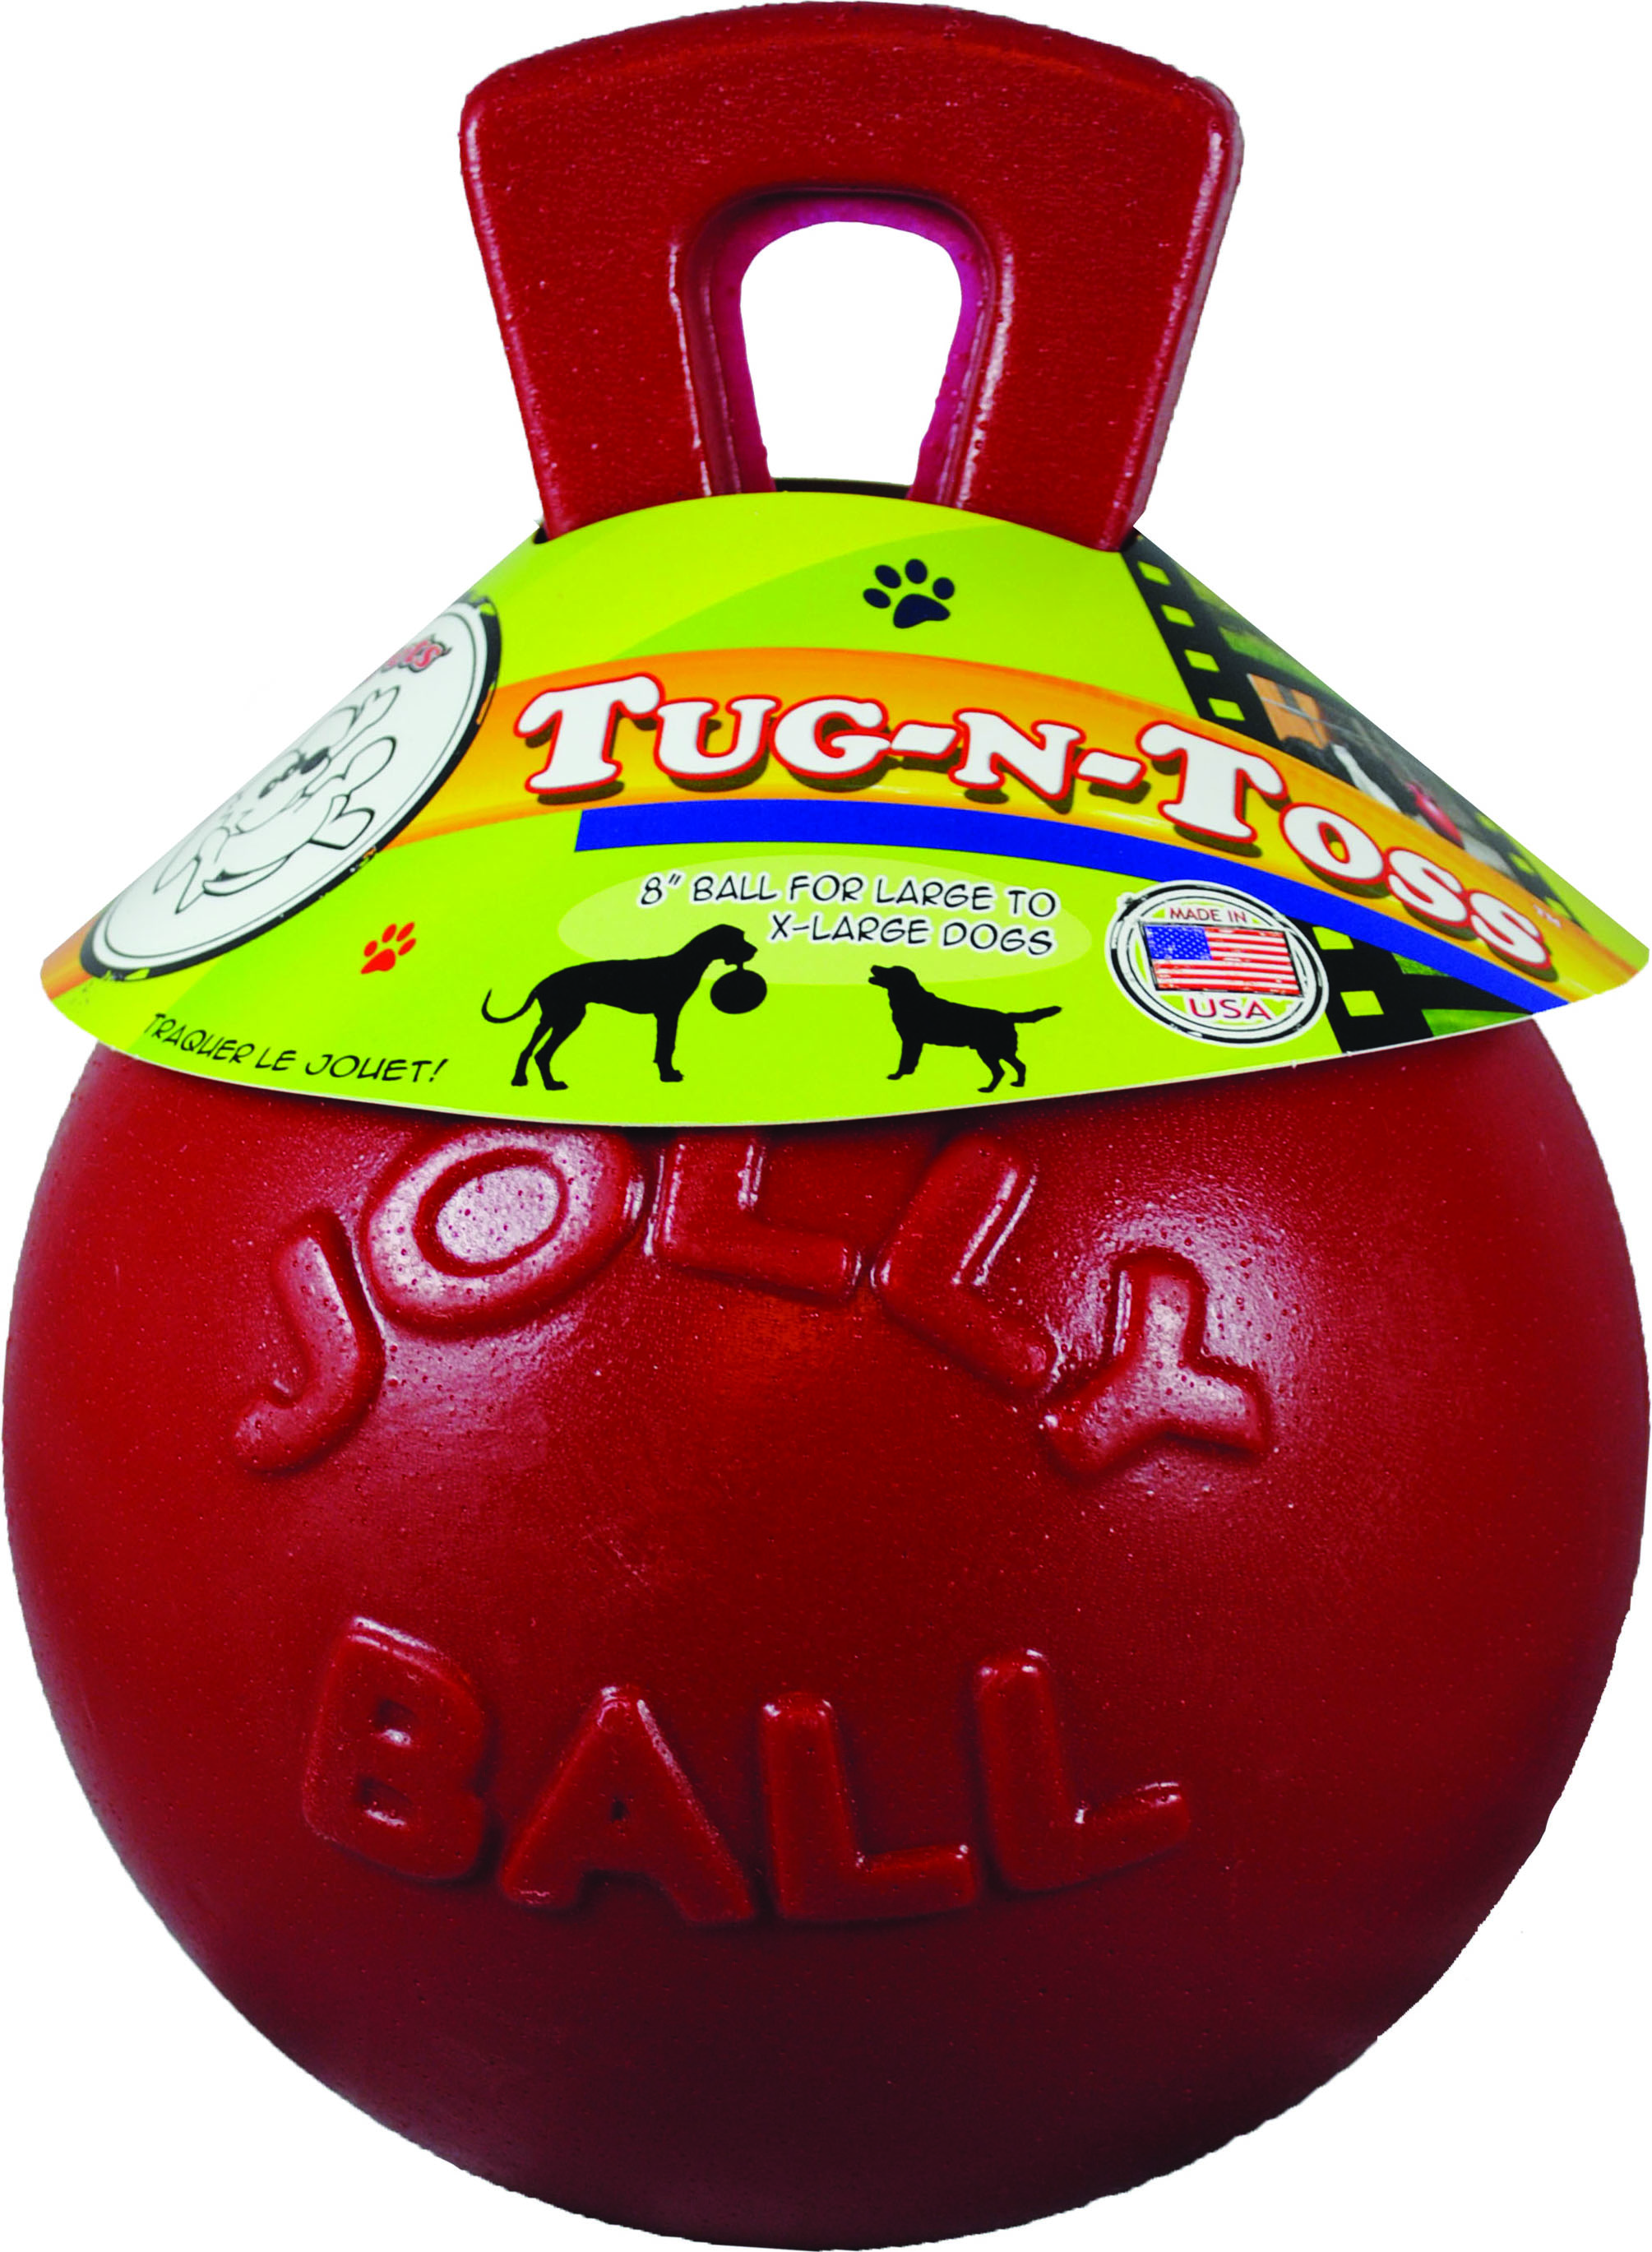 Red Tug-N-Toss ball - 6 in dog toy